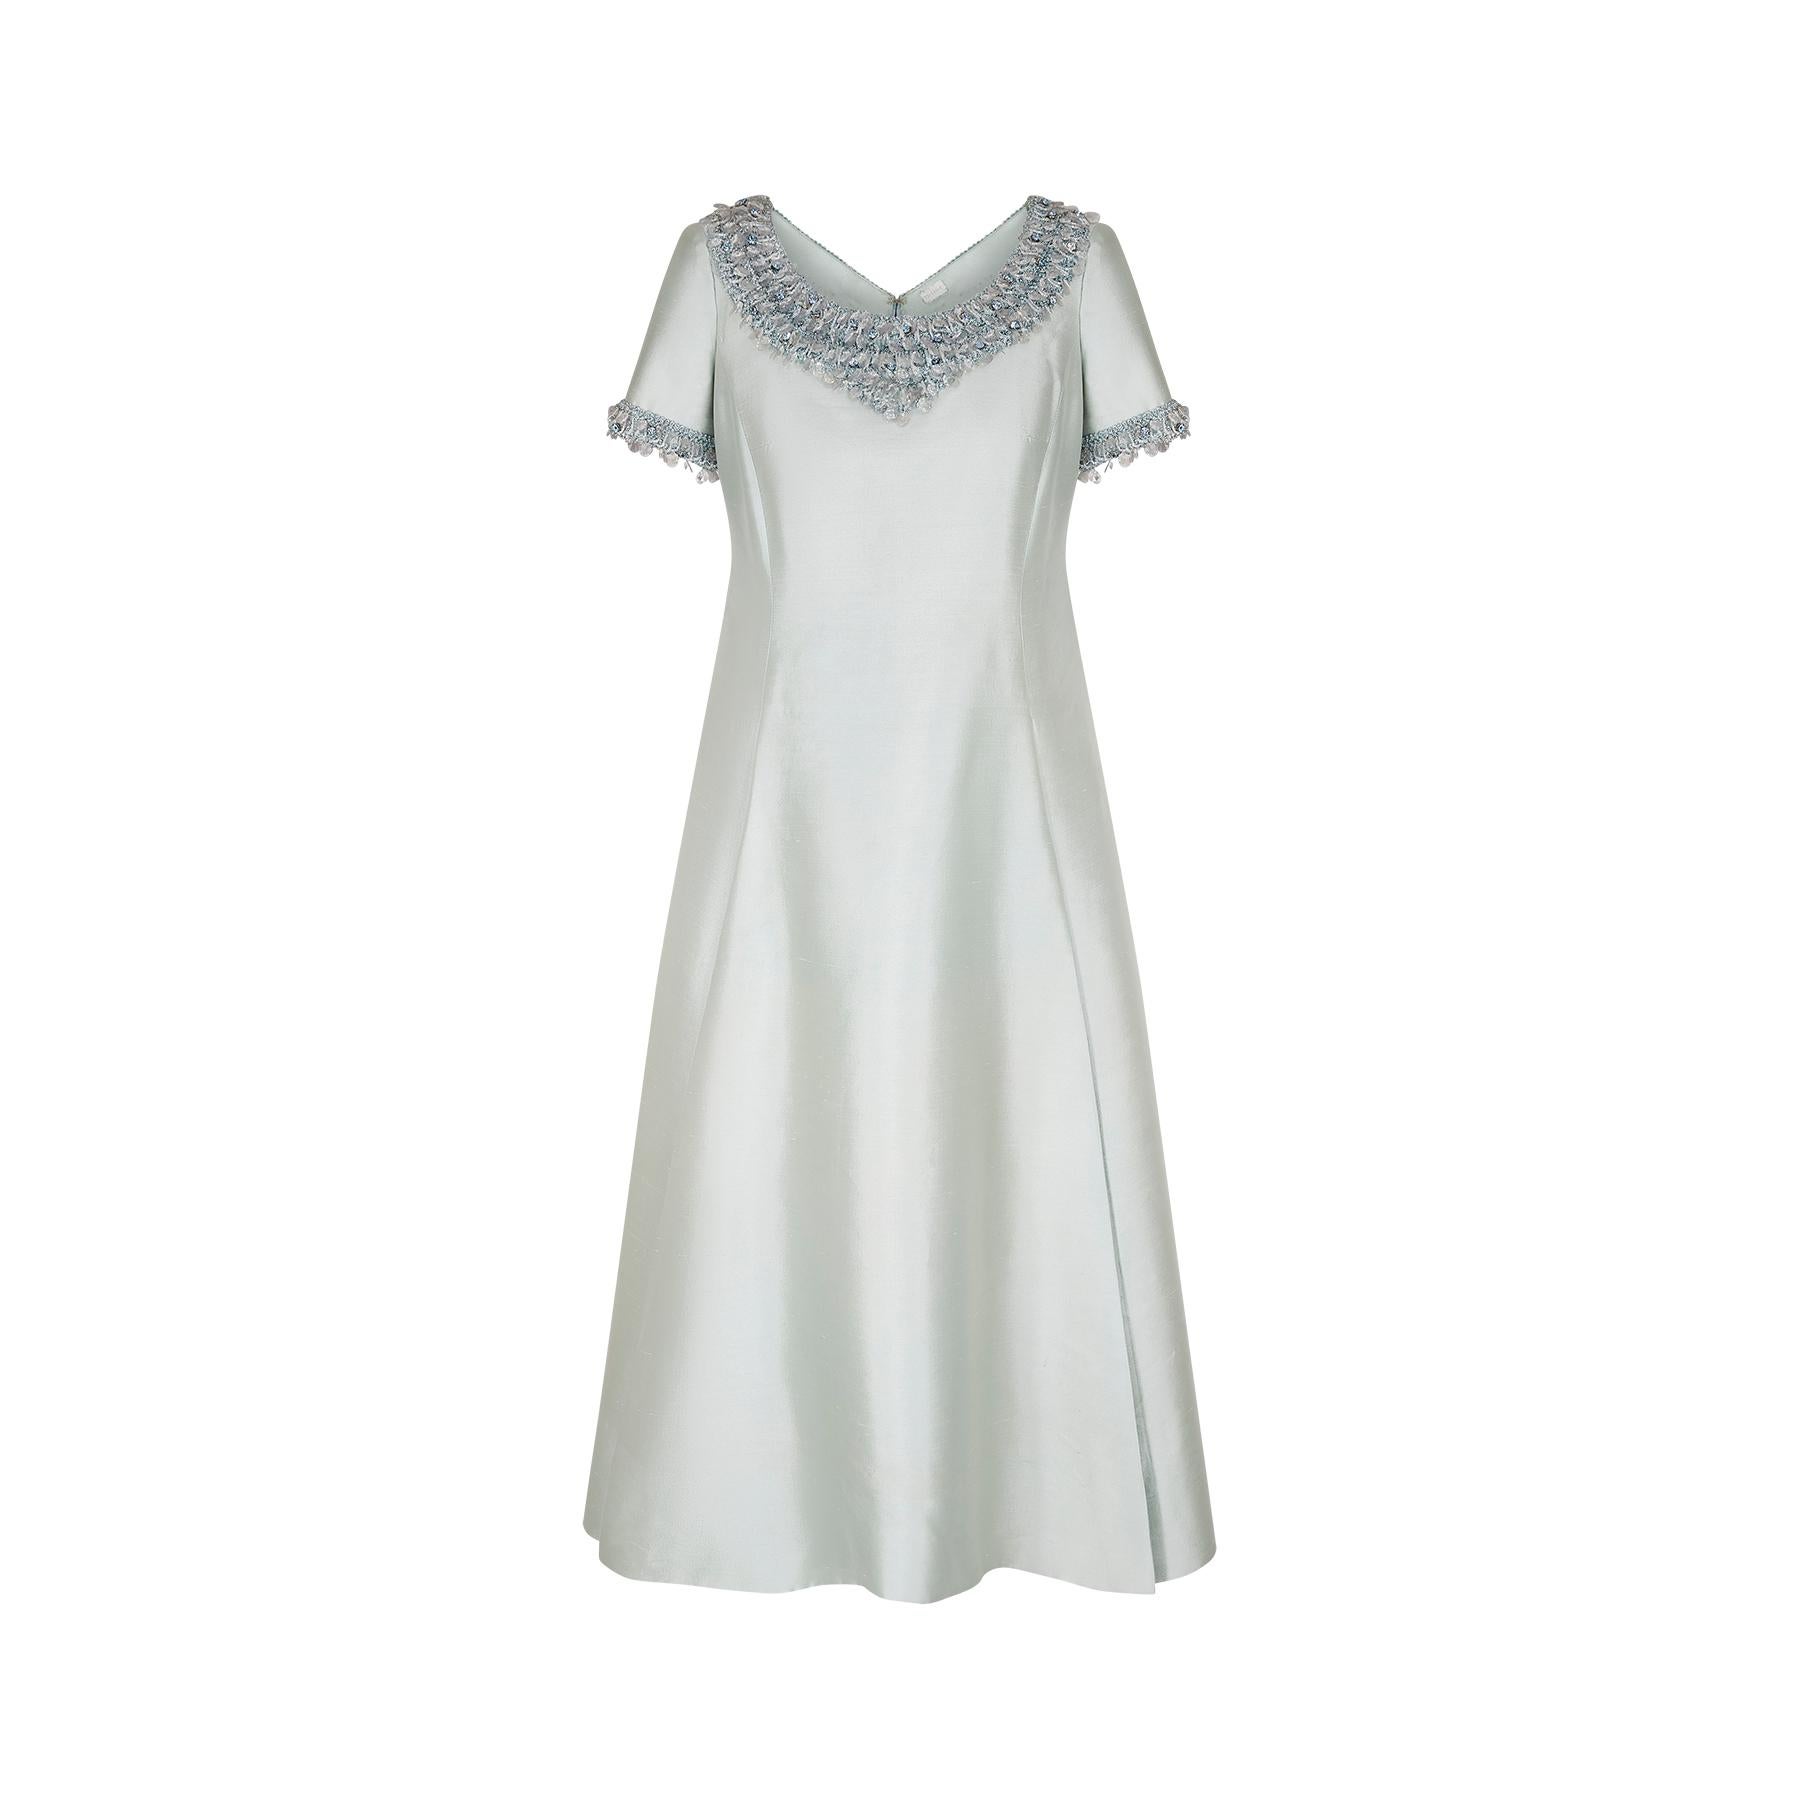 This pale seafoam green/blue dress is a very regal example of late 1960s haute couture evening wear. Cut in a classic and flattering A-line shape, it falls gracefully to around ankle length. The dress is made from silk gazar which has a lovely